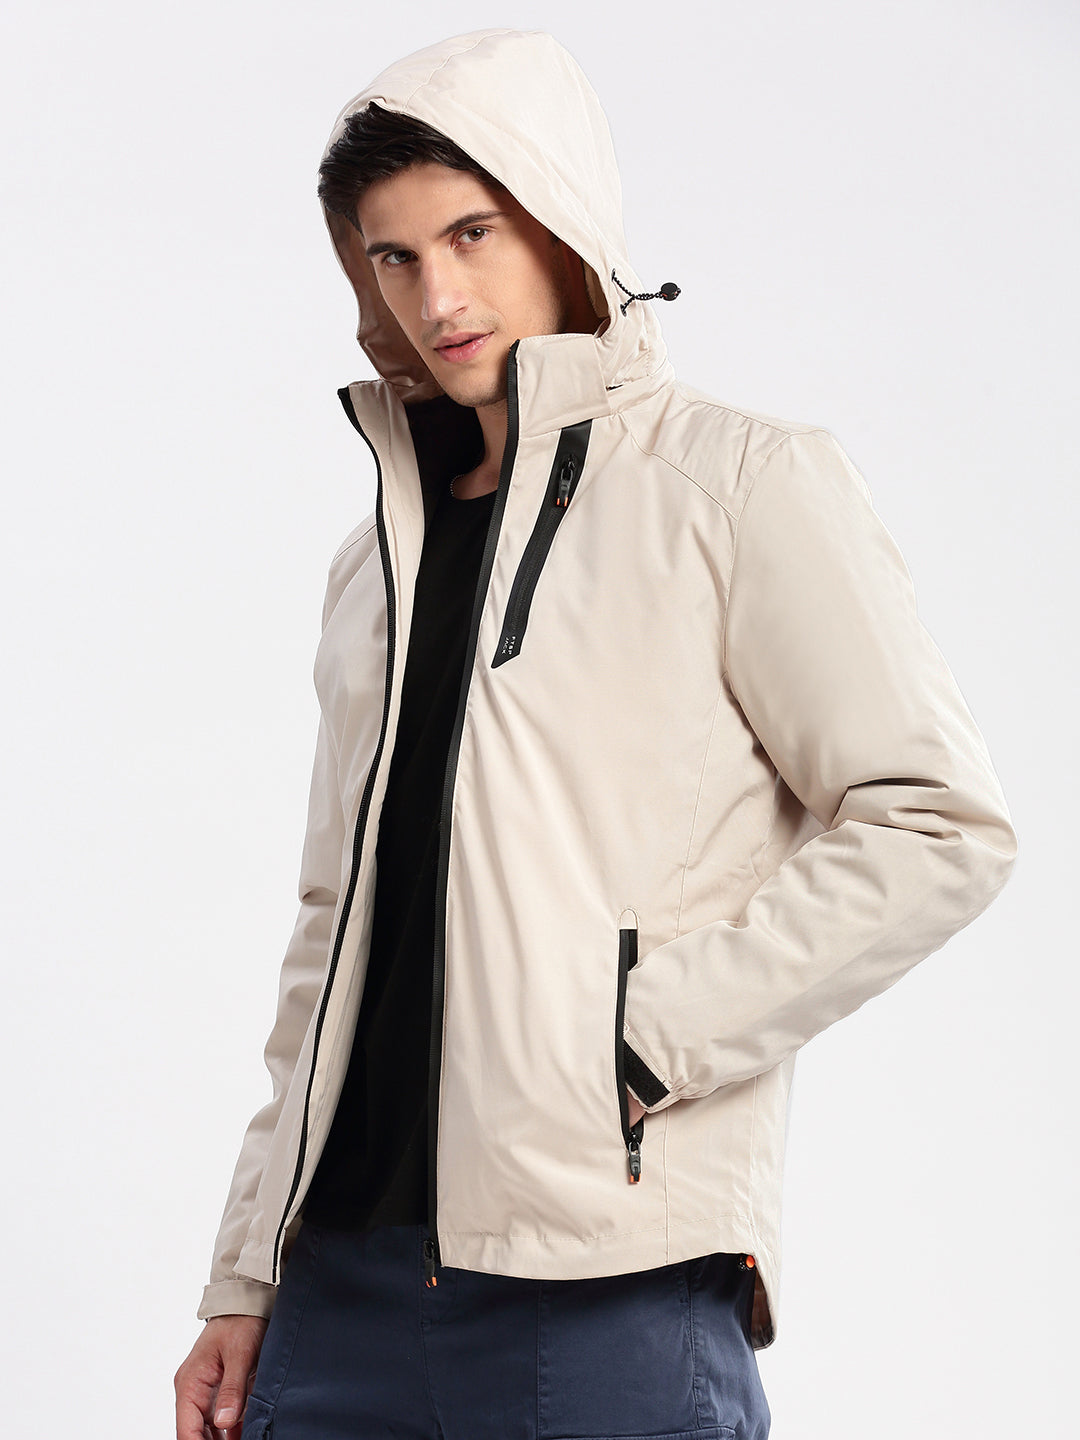 Men Hooded Cream Solid Tailored Oversized Jacket comes with Detachable Hoodie and Inner Jacket